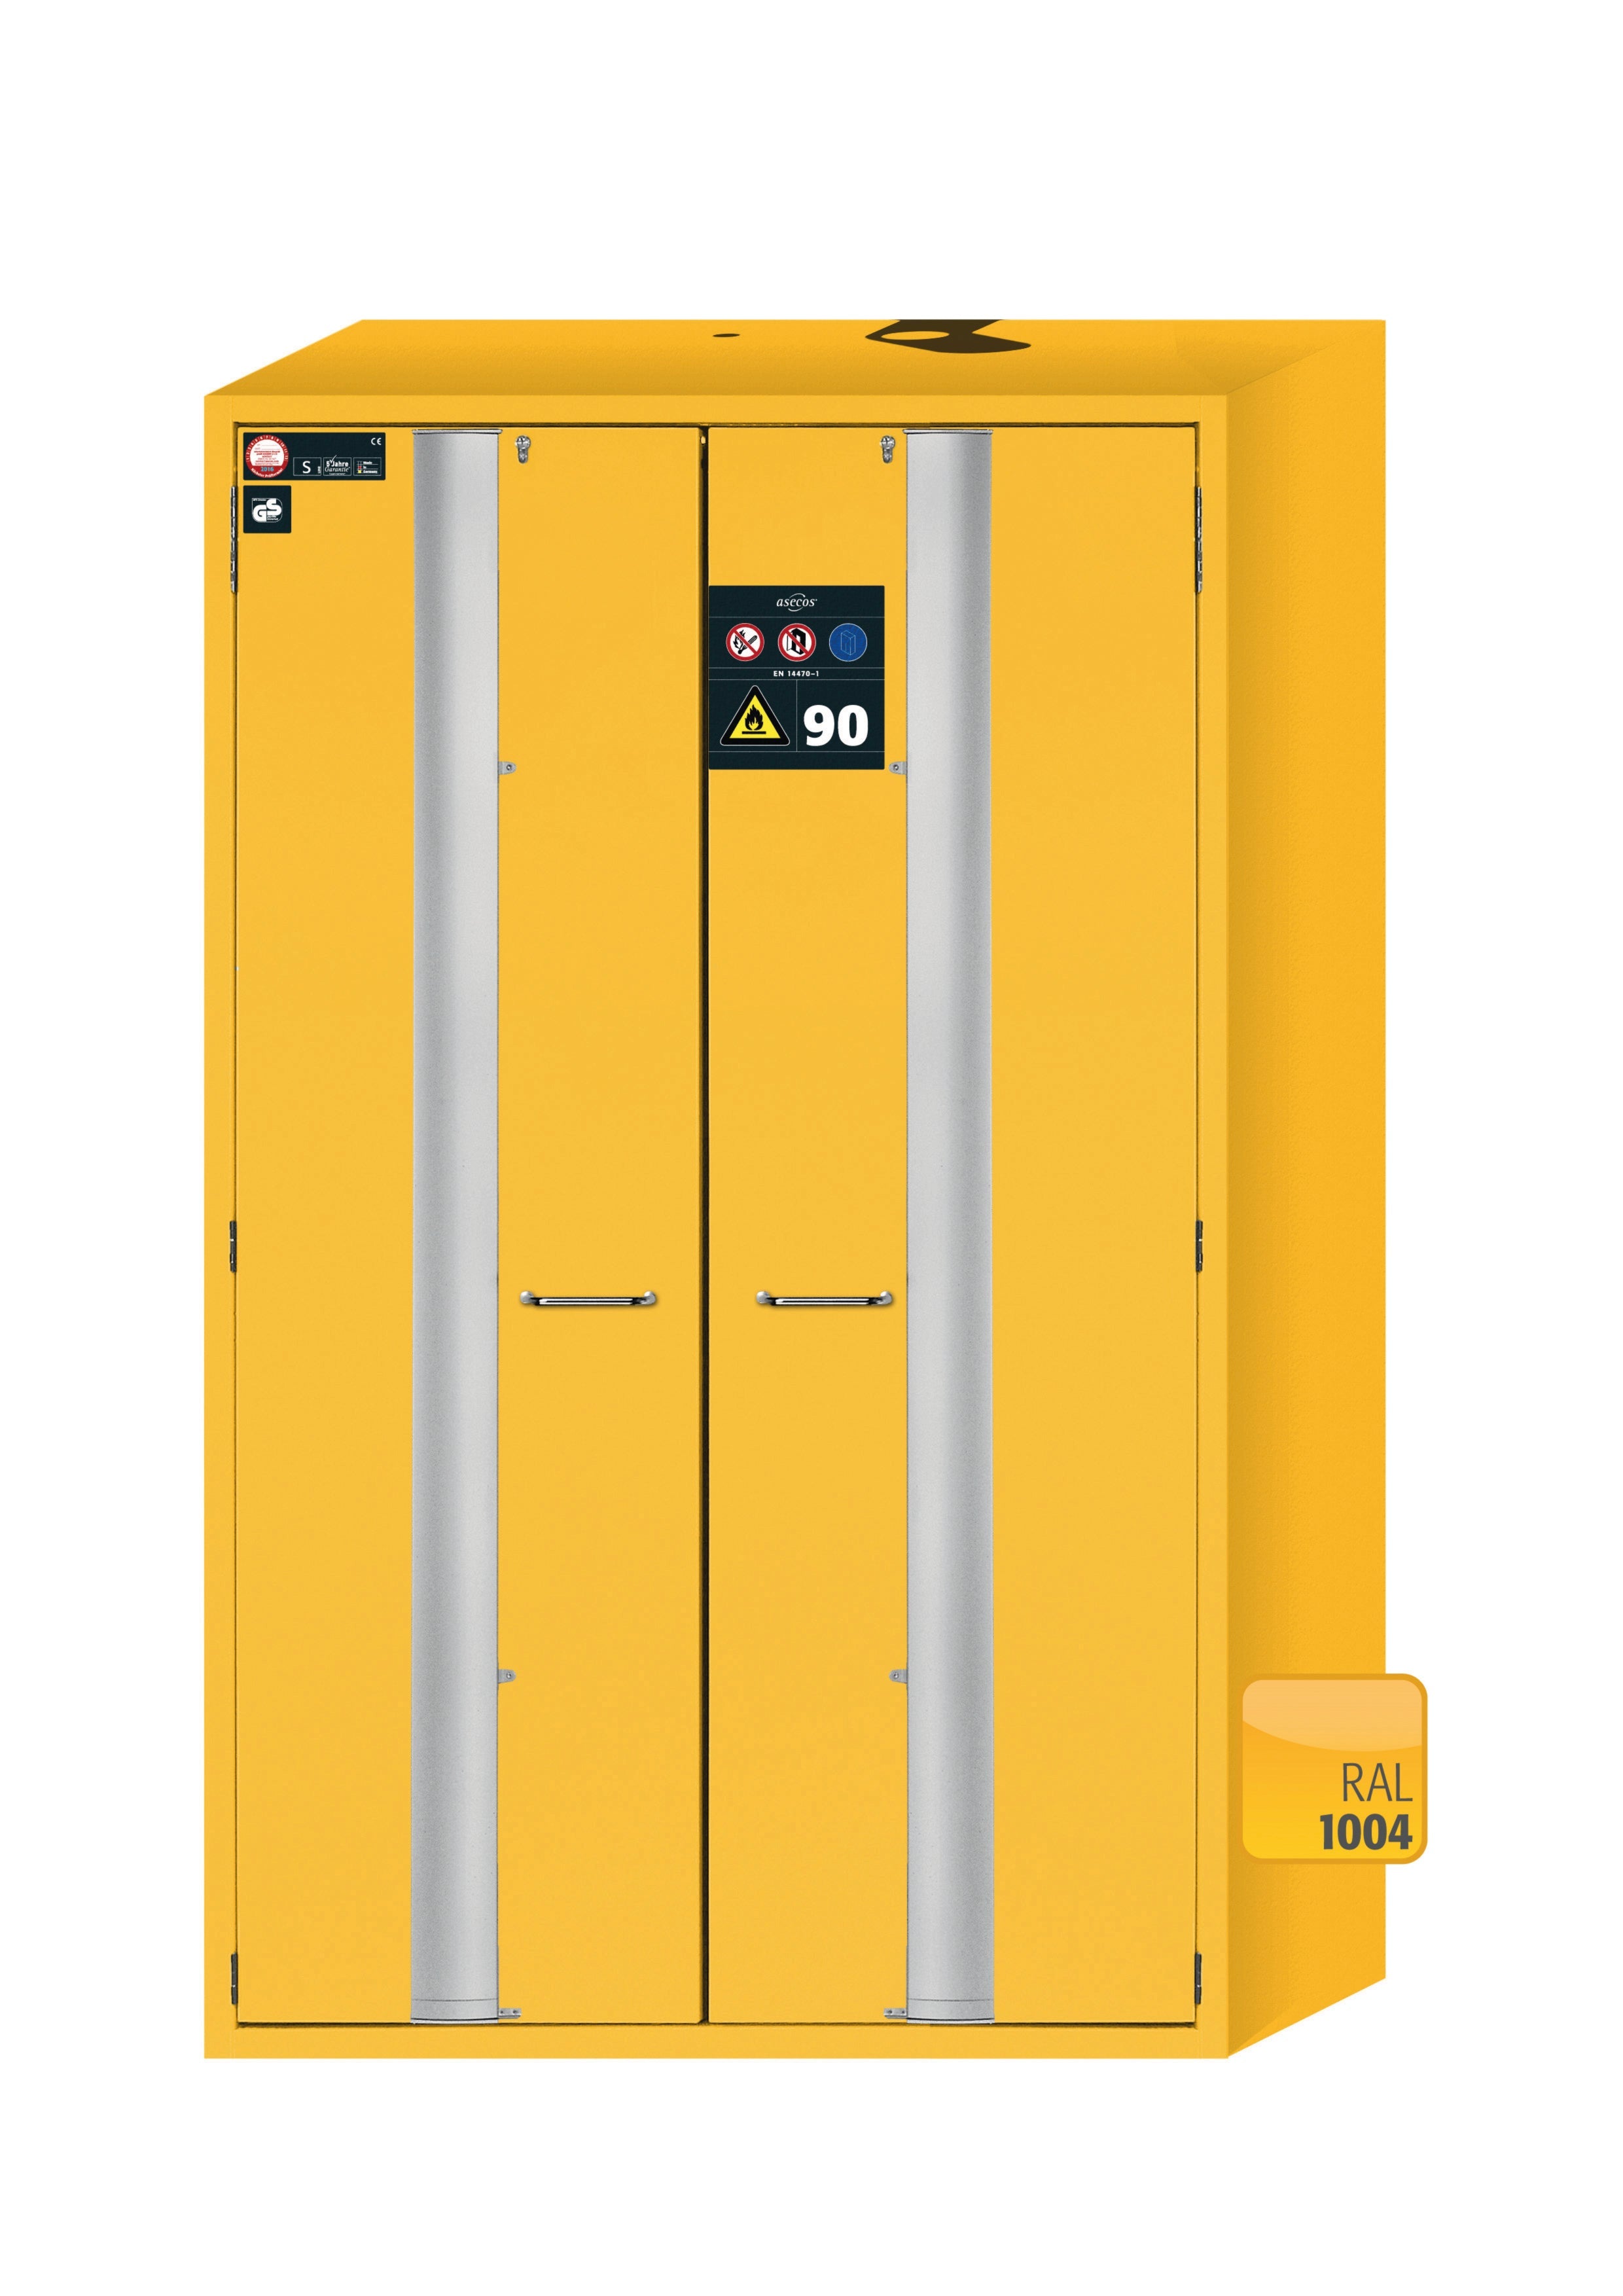 Type 90 safety storage cabinet S-PHOENIX-90 model S90.196.120.FDAS in warning yellow RAL 1004 with 4x drawer (standard) (stainless steel 1.4301),